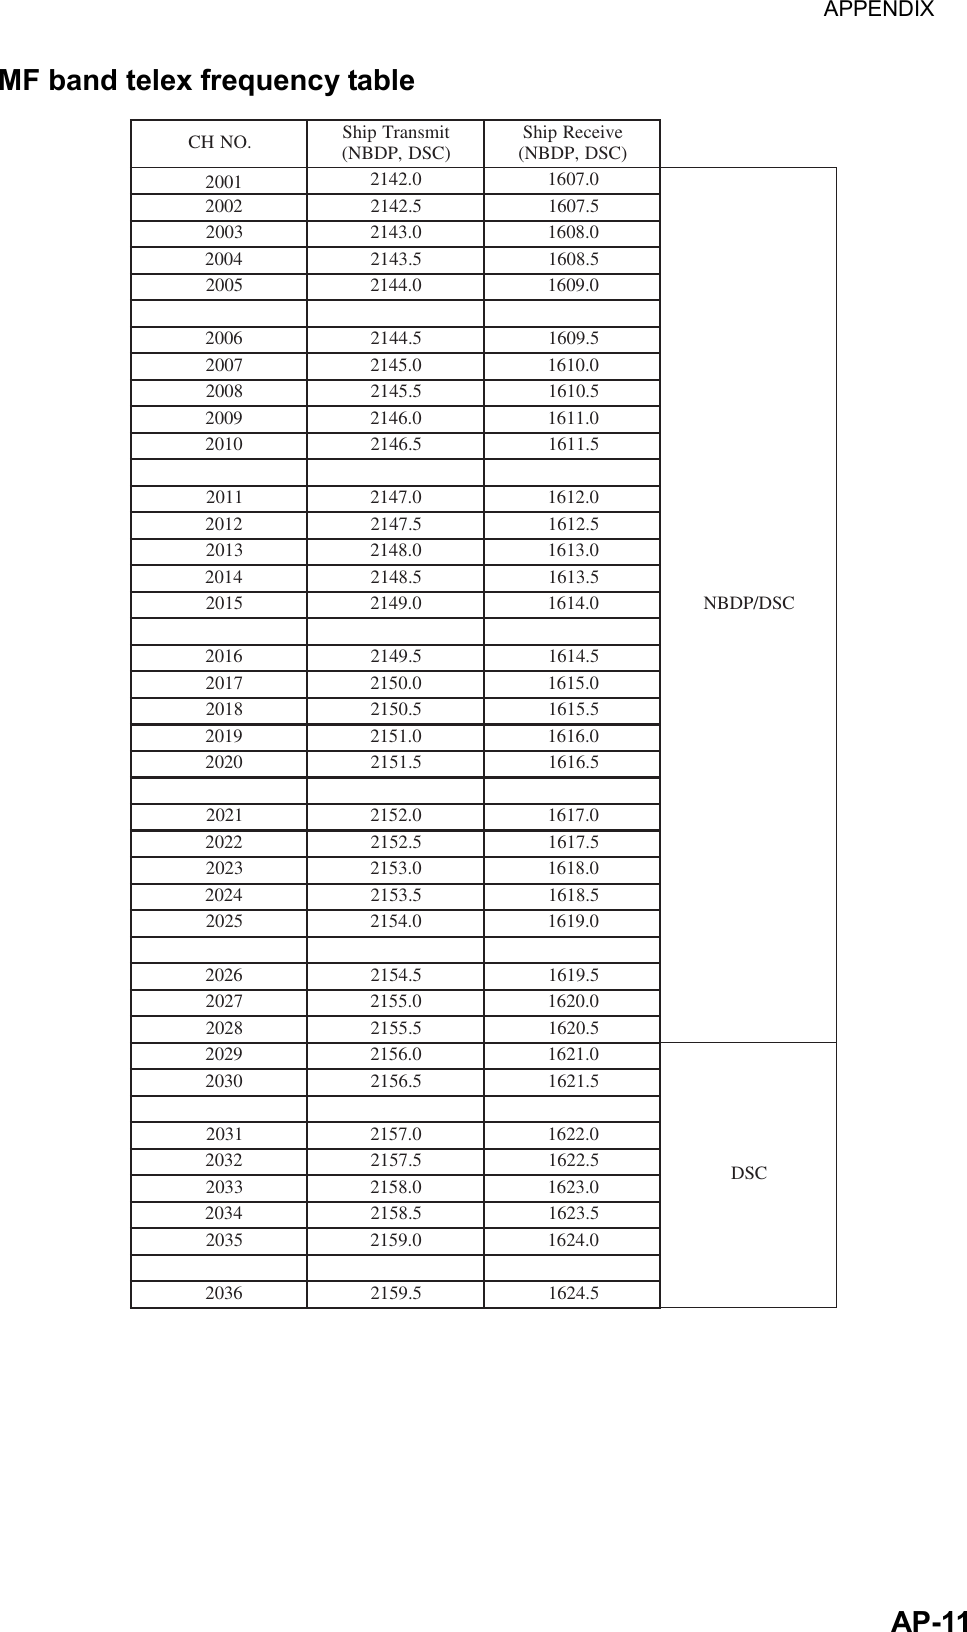 APPENDIX  AP-11MF band telex frequency table .ONHC timsnarTpihS )CSD,PDBN( evieceRpihS )CSD,PDBN(2001 0.24120.7061CSD/PDBN2002 5.24125.70612003 0.34120.80612004 5.34125.80612005 0.44120.90612006 5.44125.90612007 0.54120.01612008 5.54125.01612009 0.64120.11612010 5.64125.11612011 0.74120.21612012 5.74125.21612013 0.84120.31612014 5.84125.31612015 0.94120.41612016 5.94125.41612017 0.05120.51612018 5.05125.51612019 0.15120.61612020 5.15125.61612021 0.25120.71612022 5.25125.71612023 0.35120.81612024 5.35125.81612025 0.45120.91612026 5.45125.91612027 0.55120.02612028 5.55125.02612029 0.65120.1261CSD2030 5.65125.12612031 0.75120.22612032 5.75125.22612033 0.85120.32612034 5.85125.32612035 0.95120.42612036 5.95125.4261 